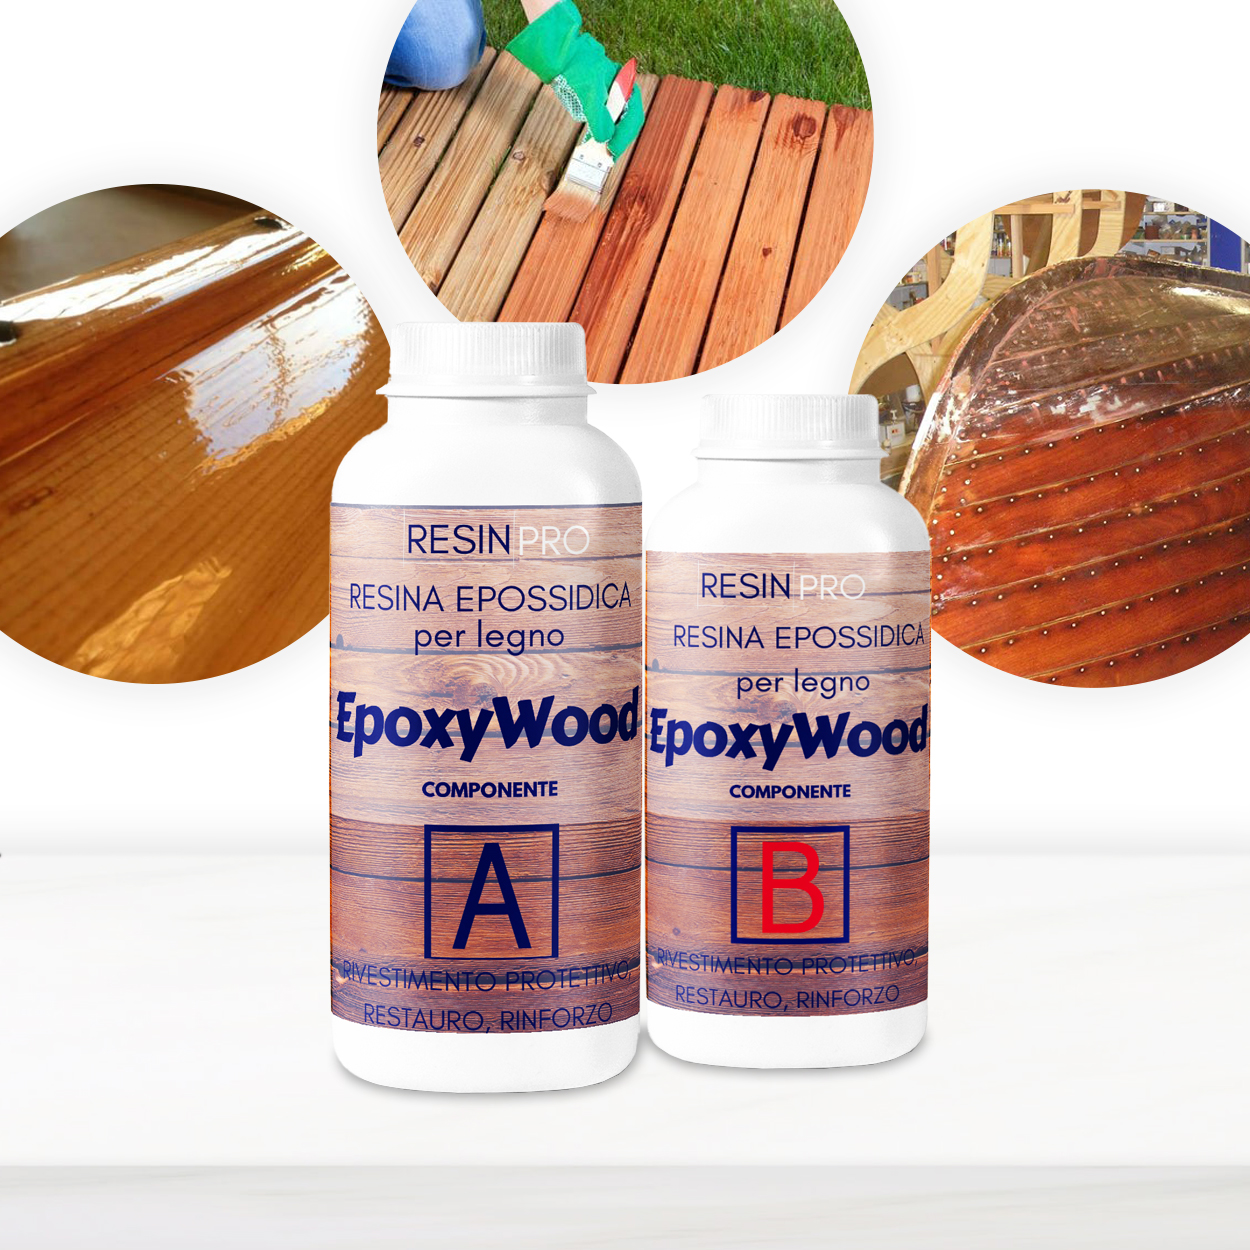 EPOXYWOOD Epoxy Resin for Wood - Protective coating, Restoration,  Reinforcement - ResinPro - Creativity at your service